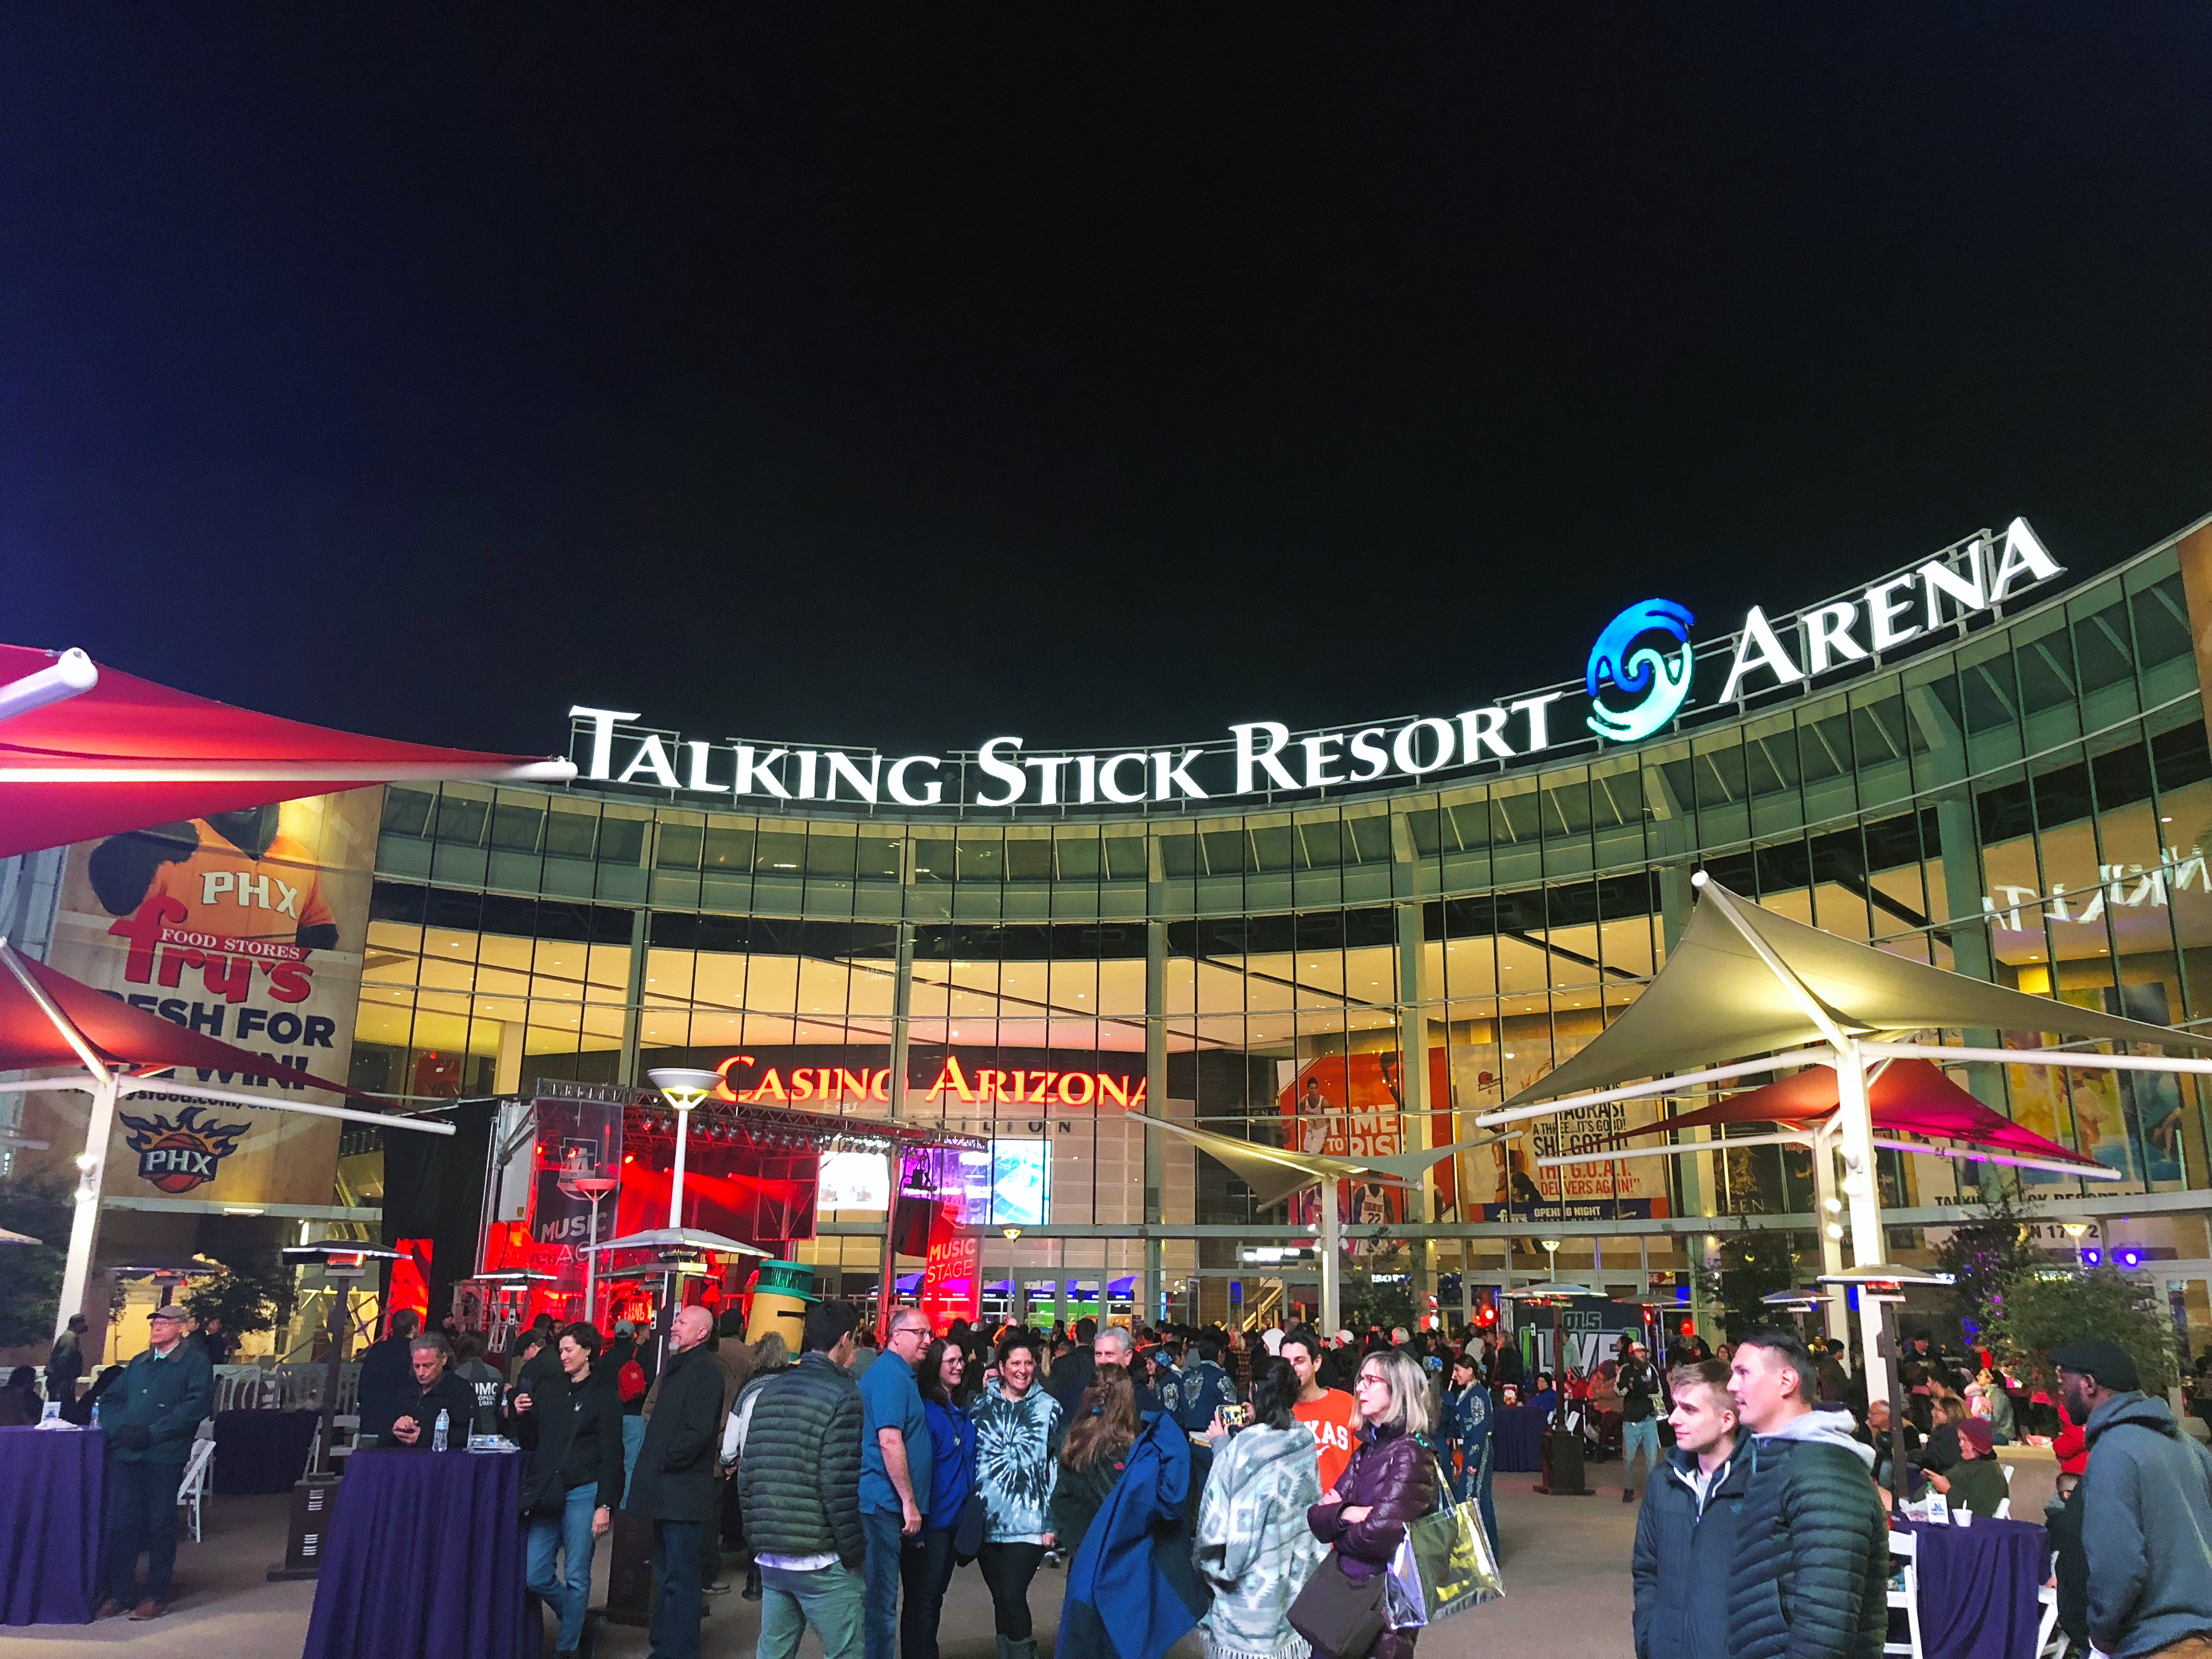 How Far is the Walking Stick Resort from Downtown Phoenix 